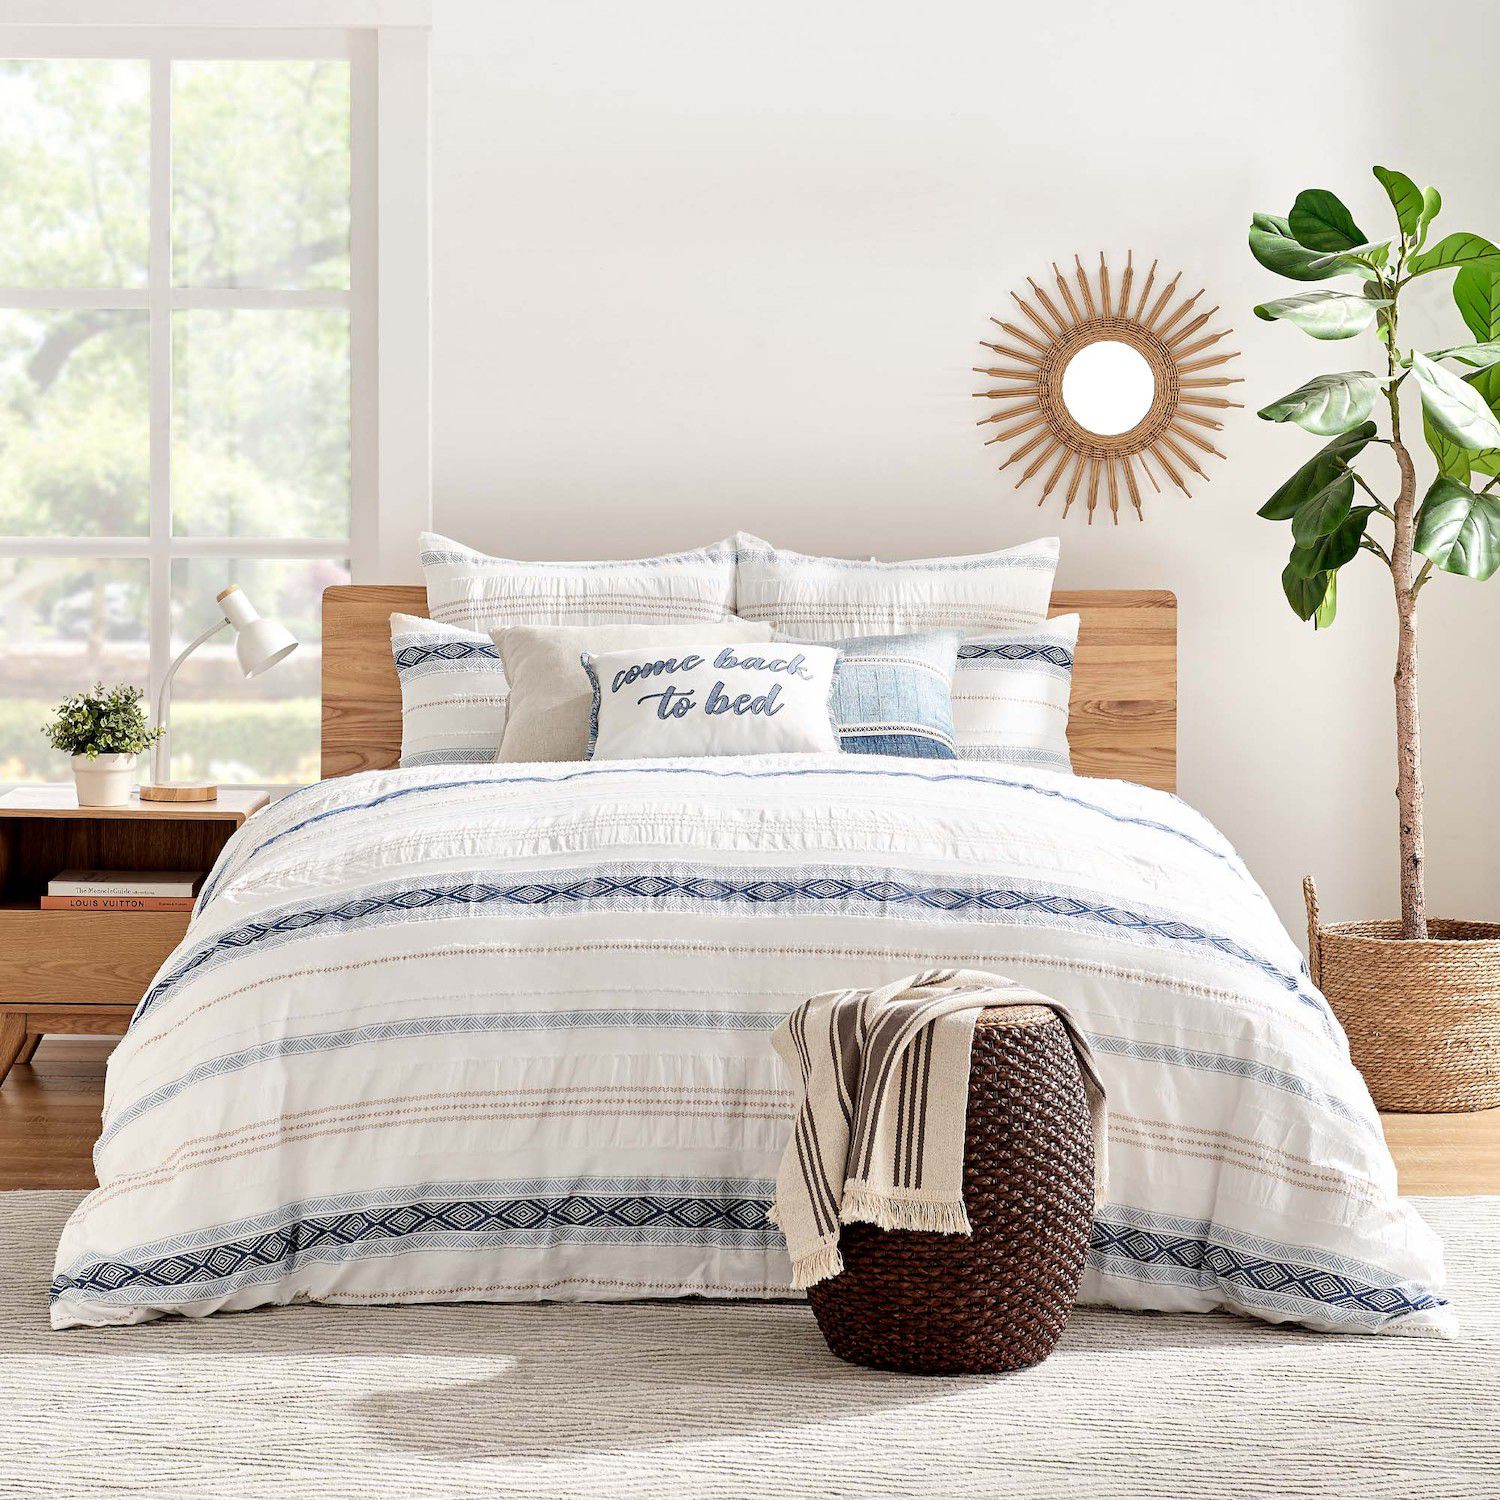 Image for Levtex Home Pickford Comforter Set with Shams at Kohl's.